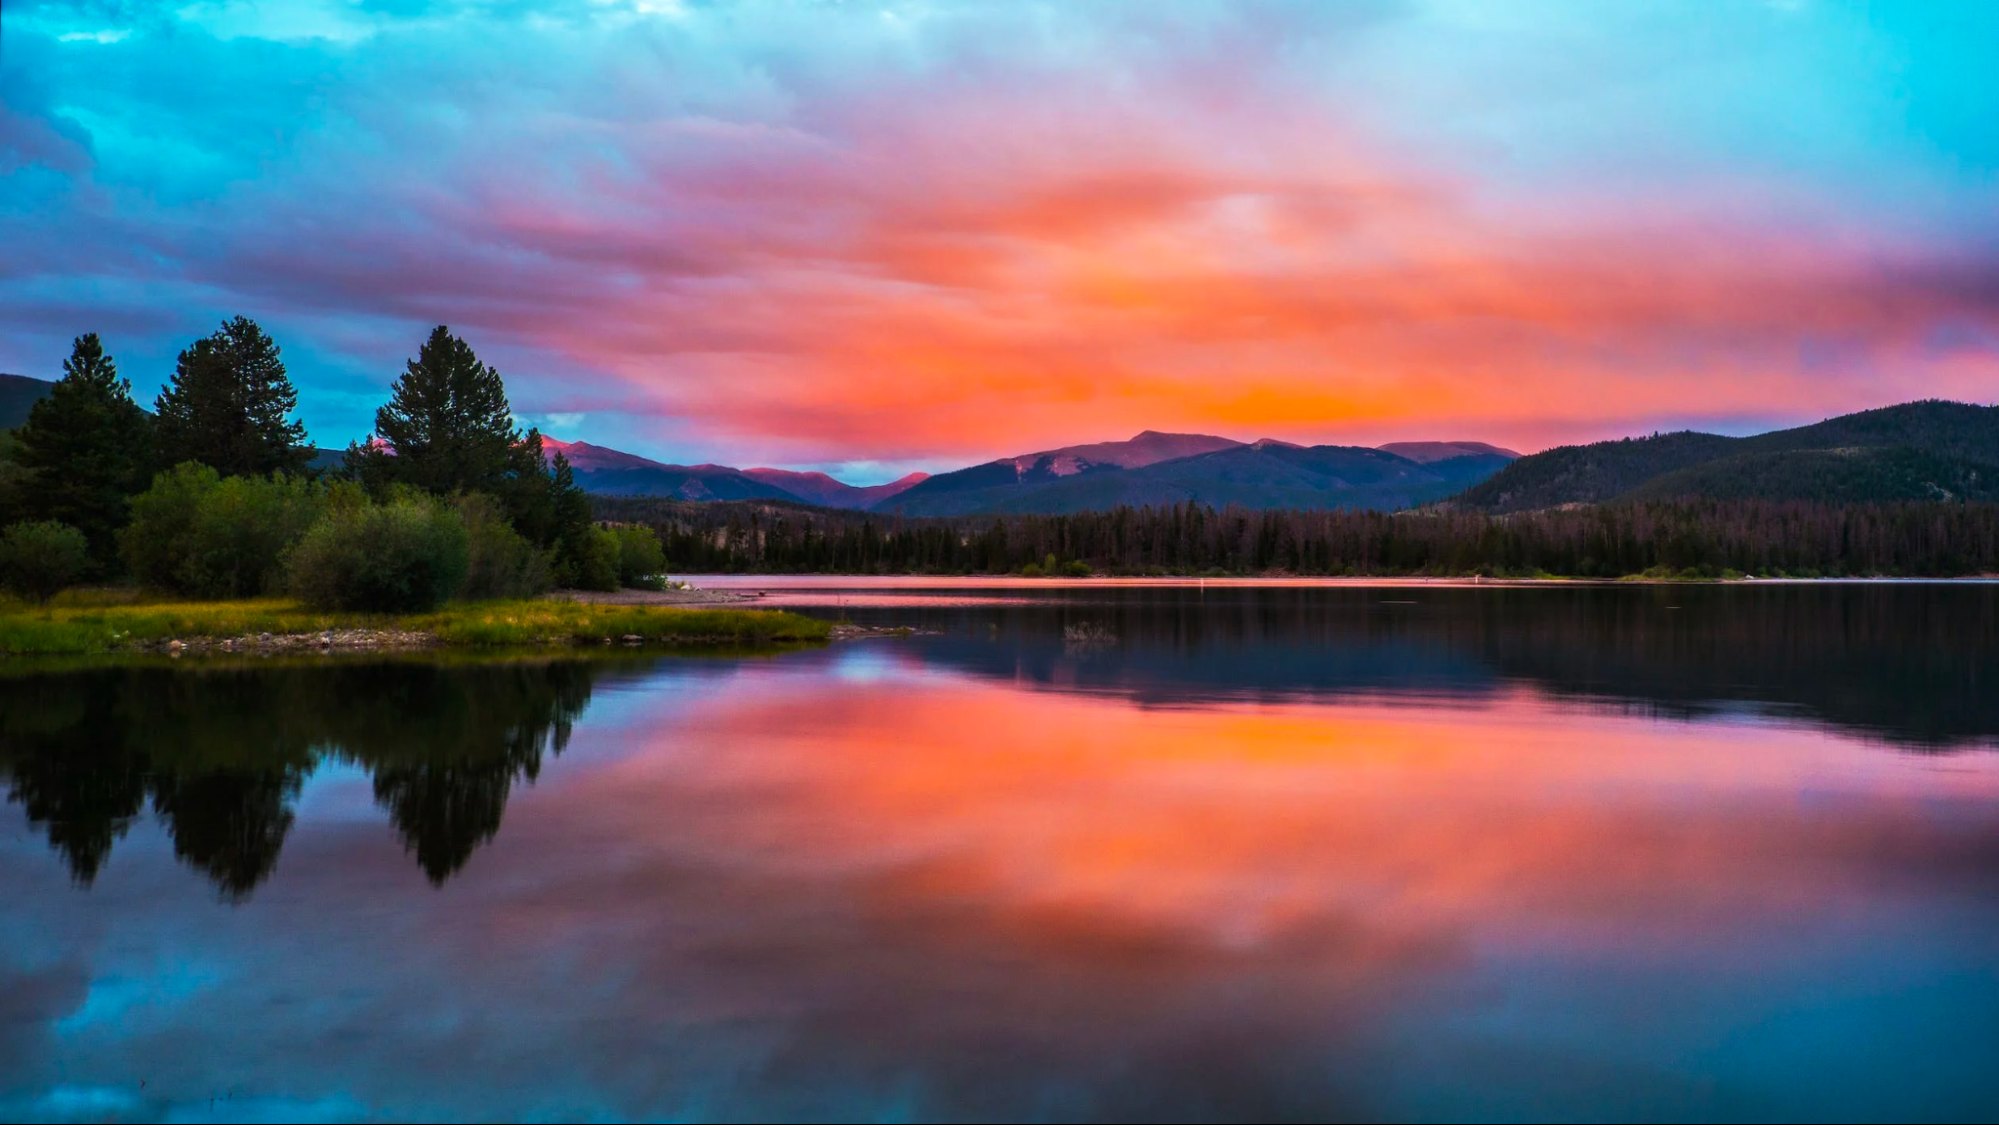 This is an image of a Colorado lake at sunset, with mountains in the background.